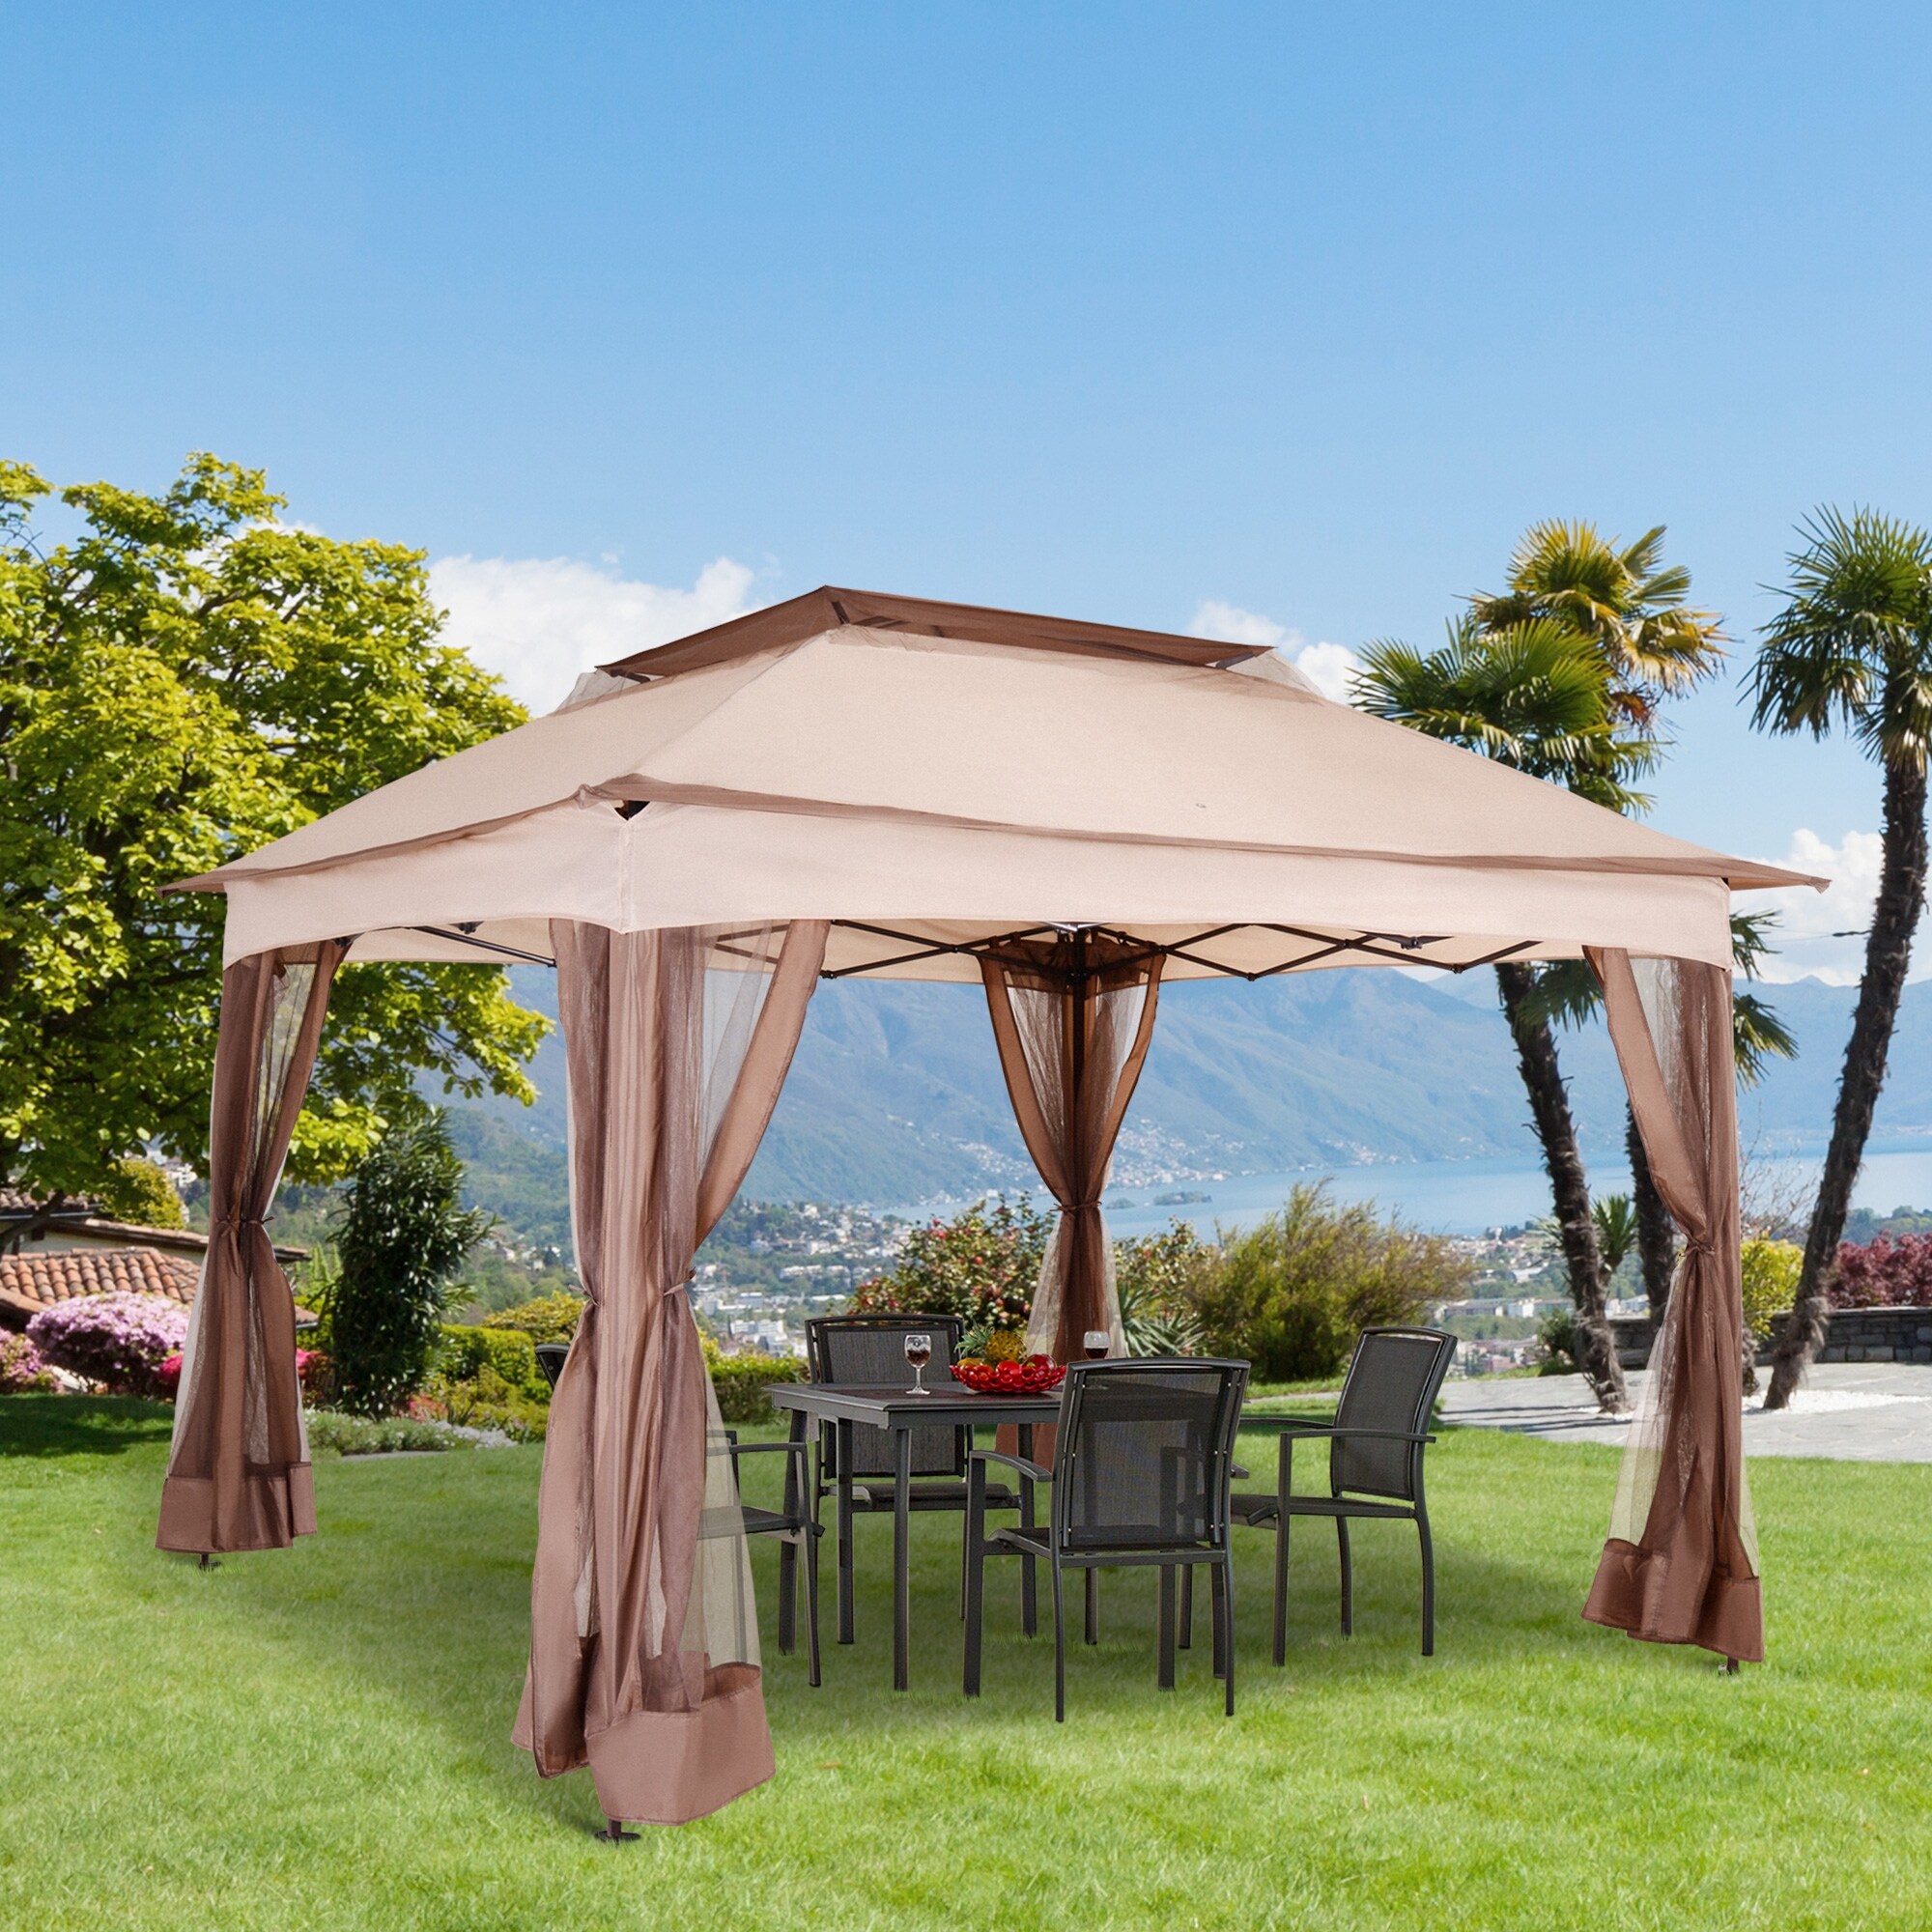 Outsunny 11' x 11' Pop Up Gazebo Canopy with 2-Tier Soft Top, and